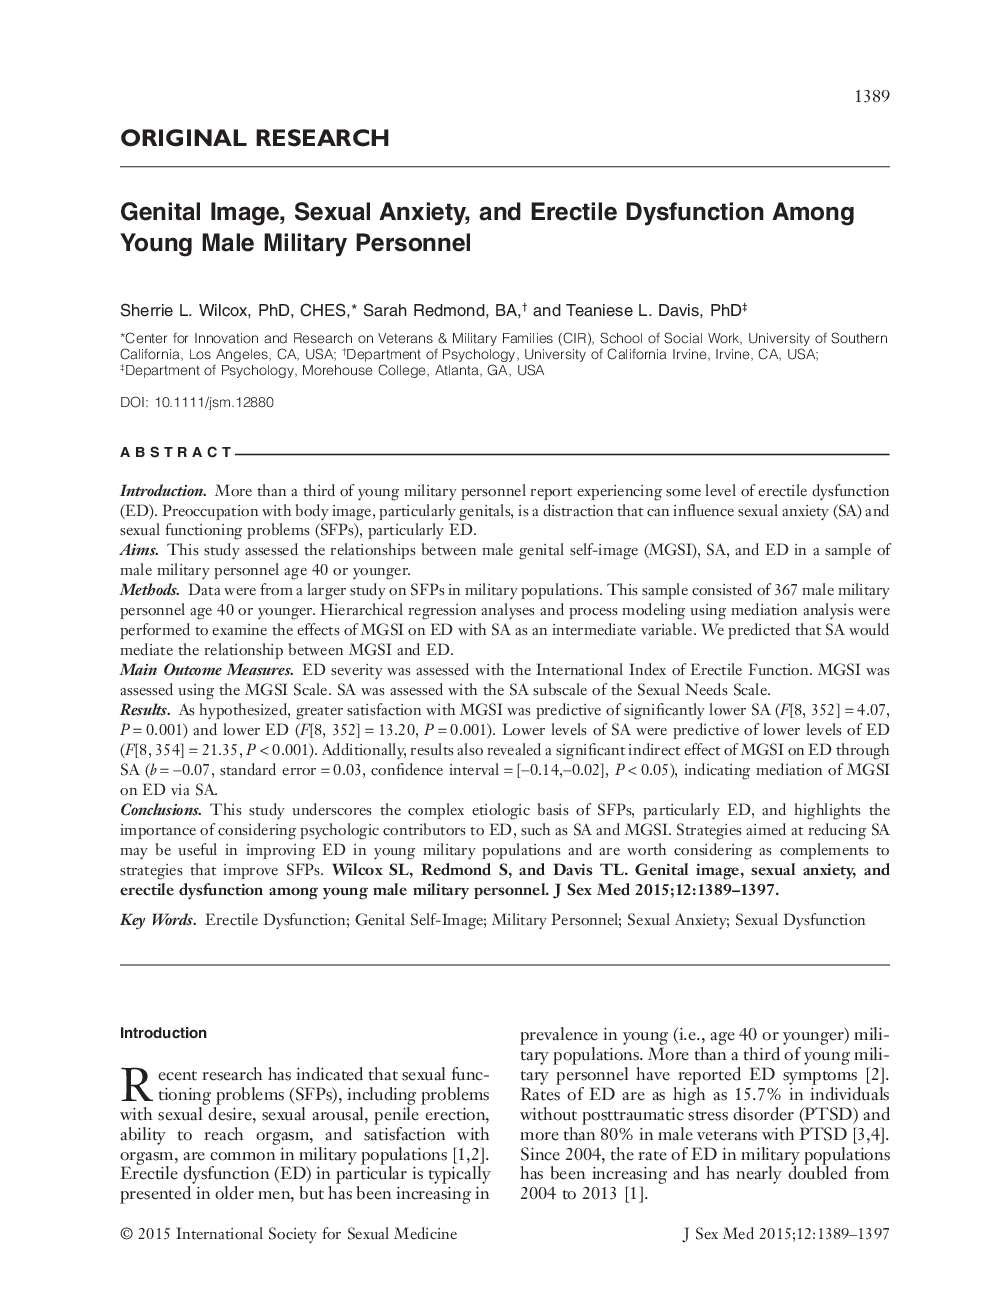 Genital Image, Sexual Anxiety, and Erectile Dysfunction Among Young Male Military Personnel 